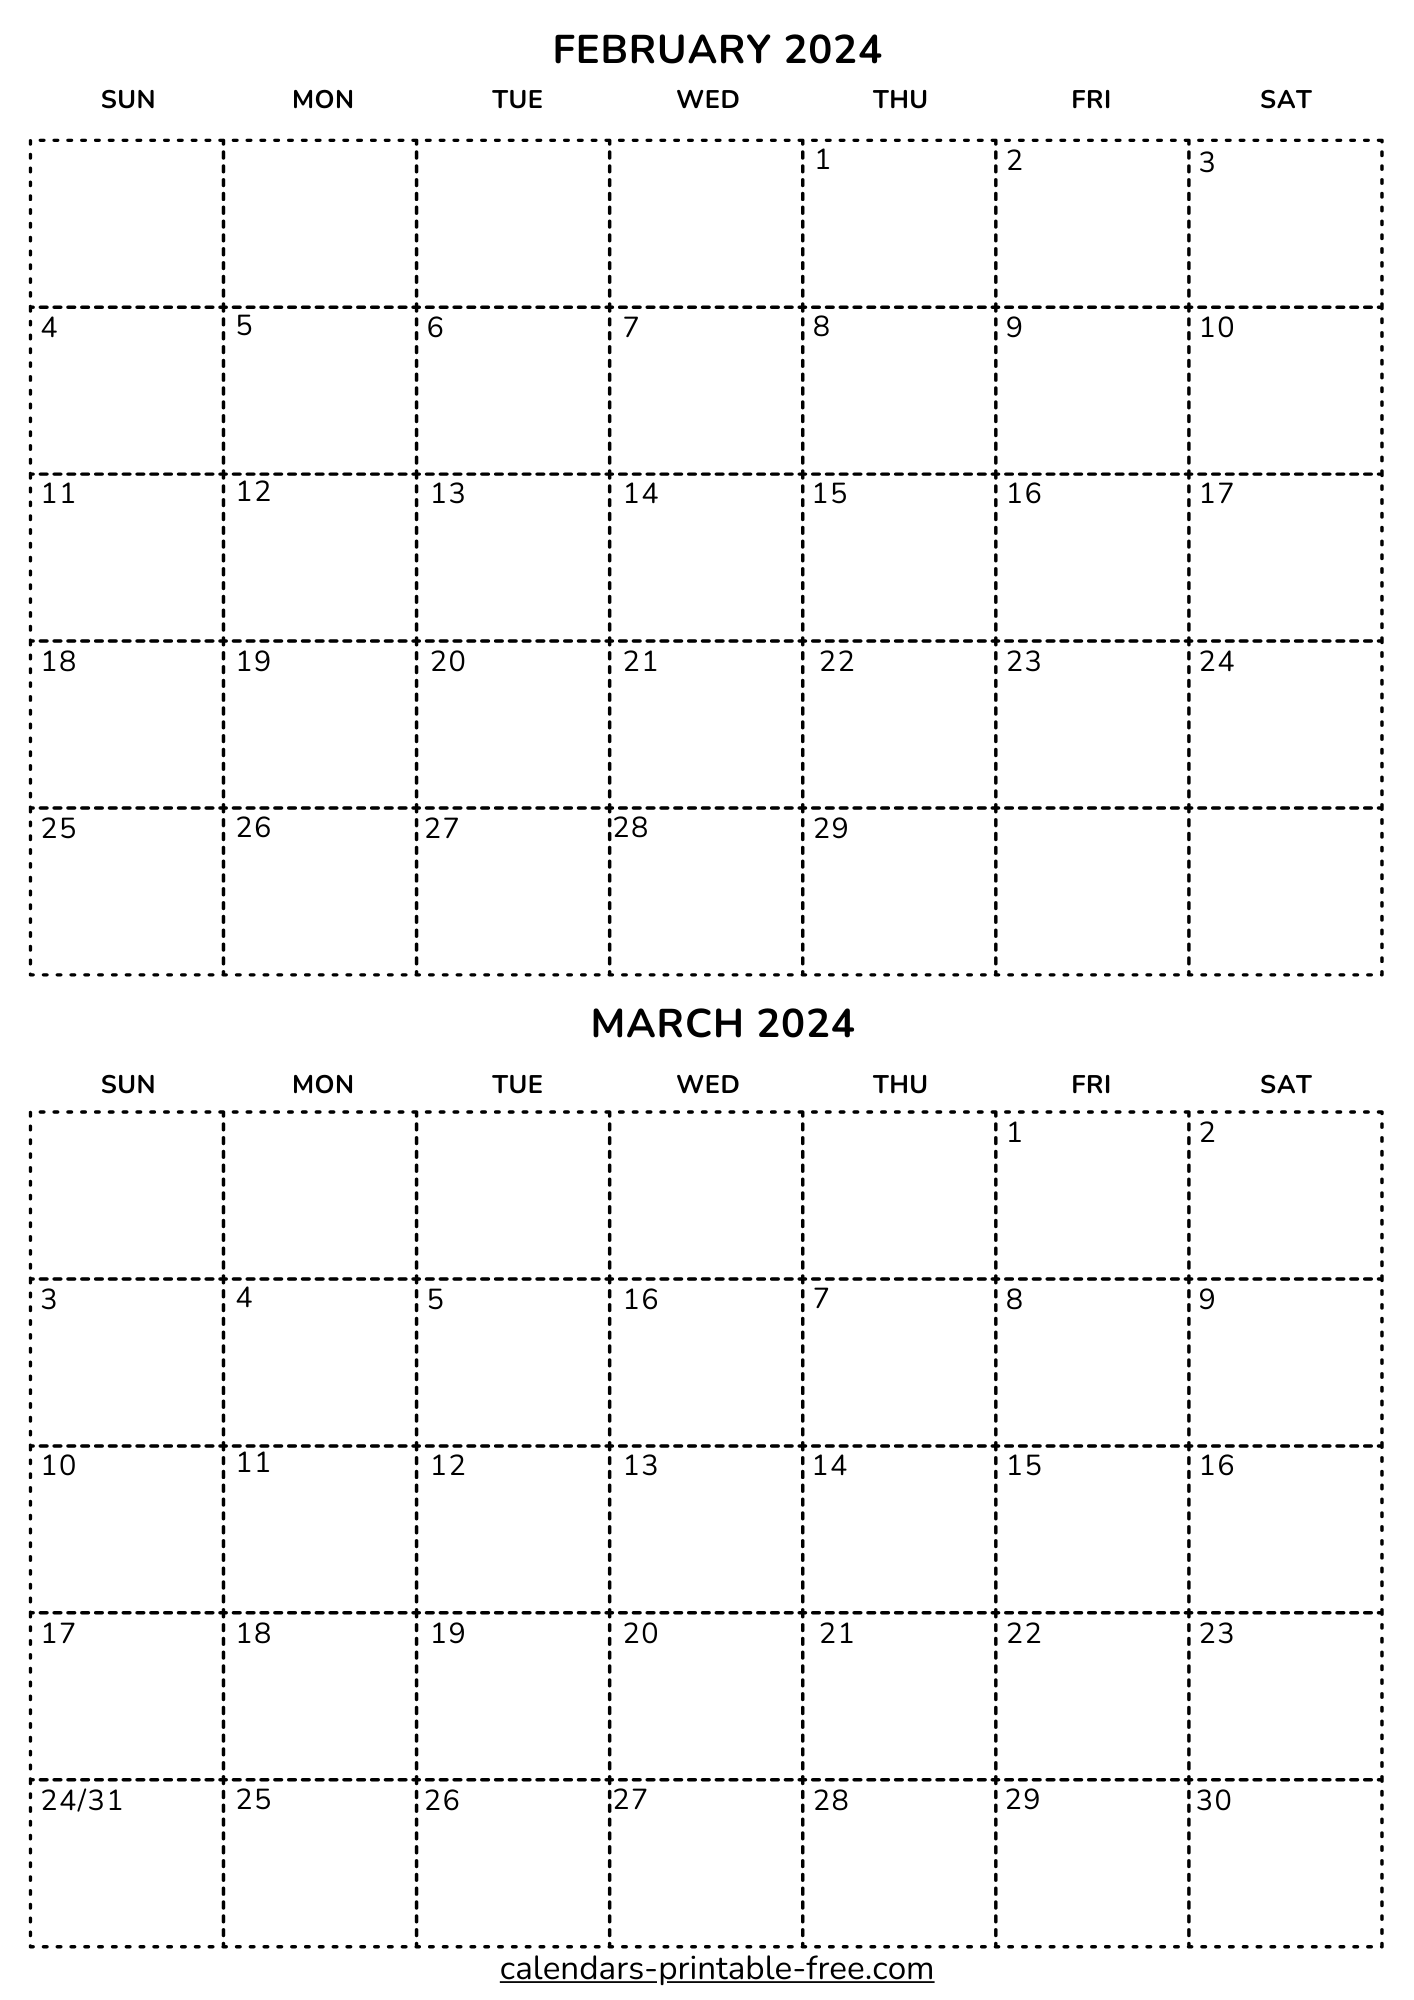 February and March 2024 Calendar